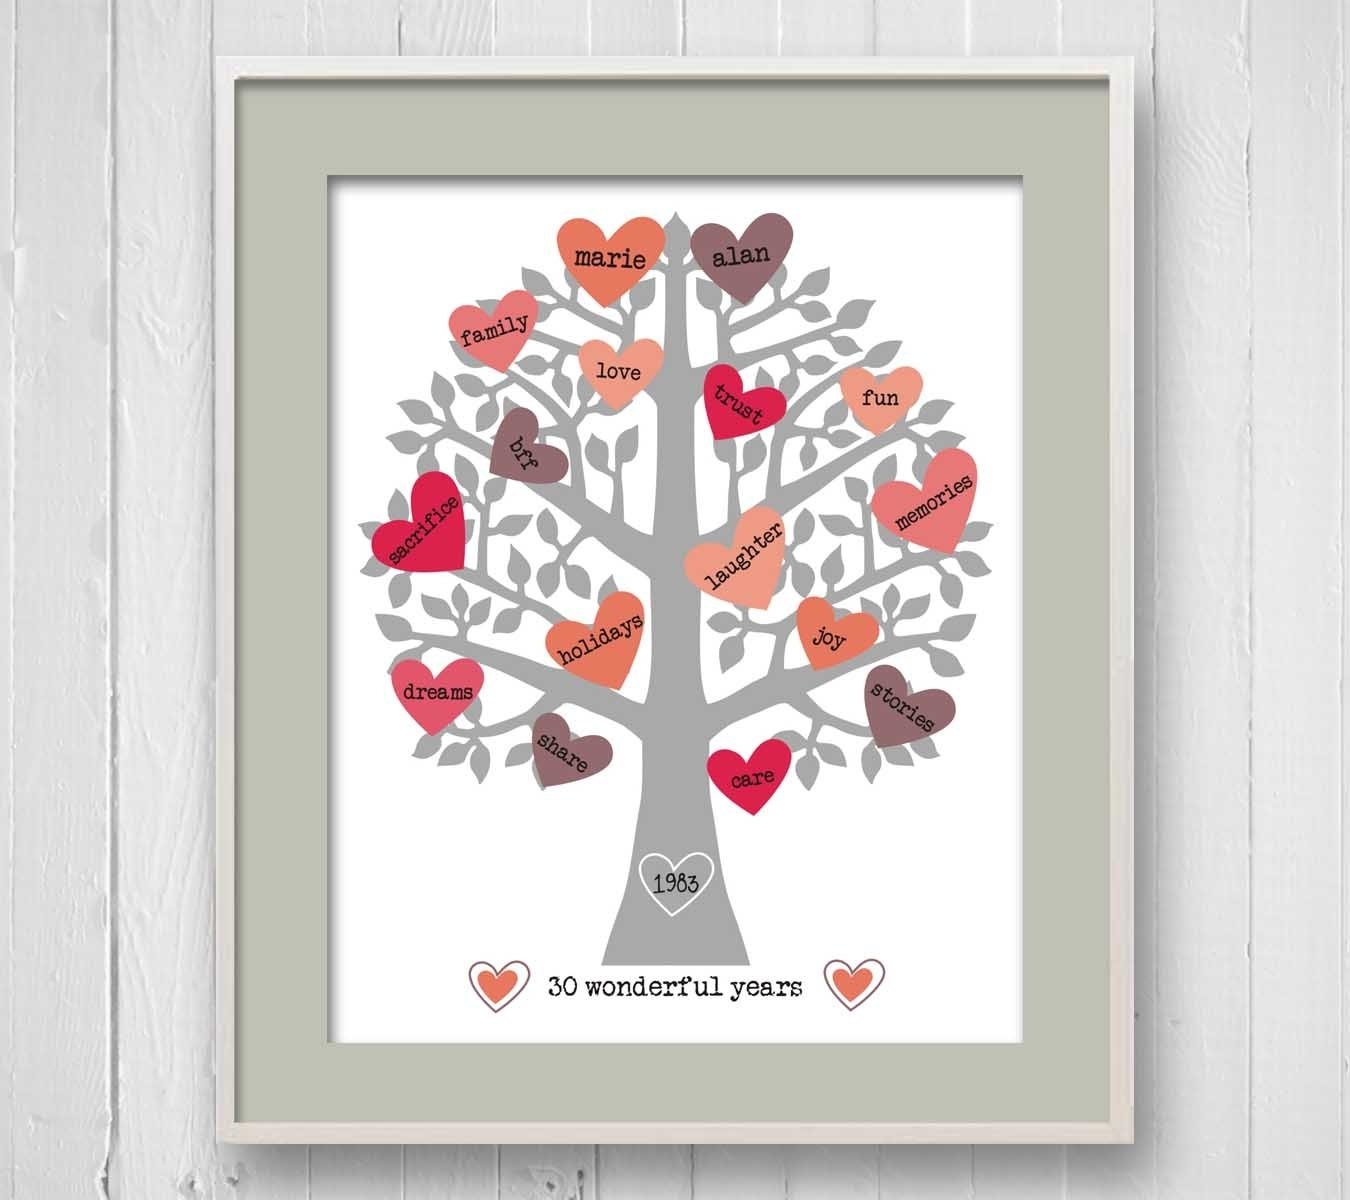 10 Lovable Anniversary Gifts For Parents Ideas wedding anniversary gifts gifts for parents on wedding anniversary 2022